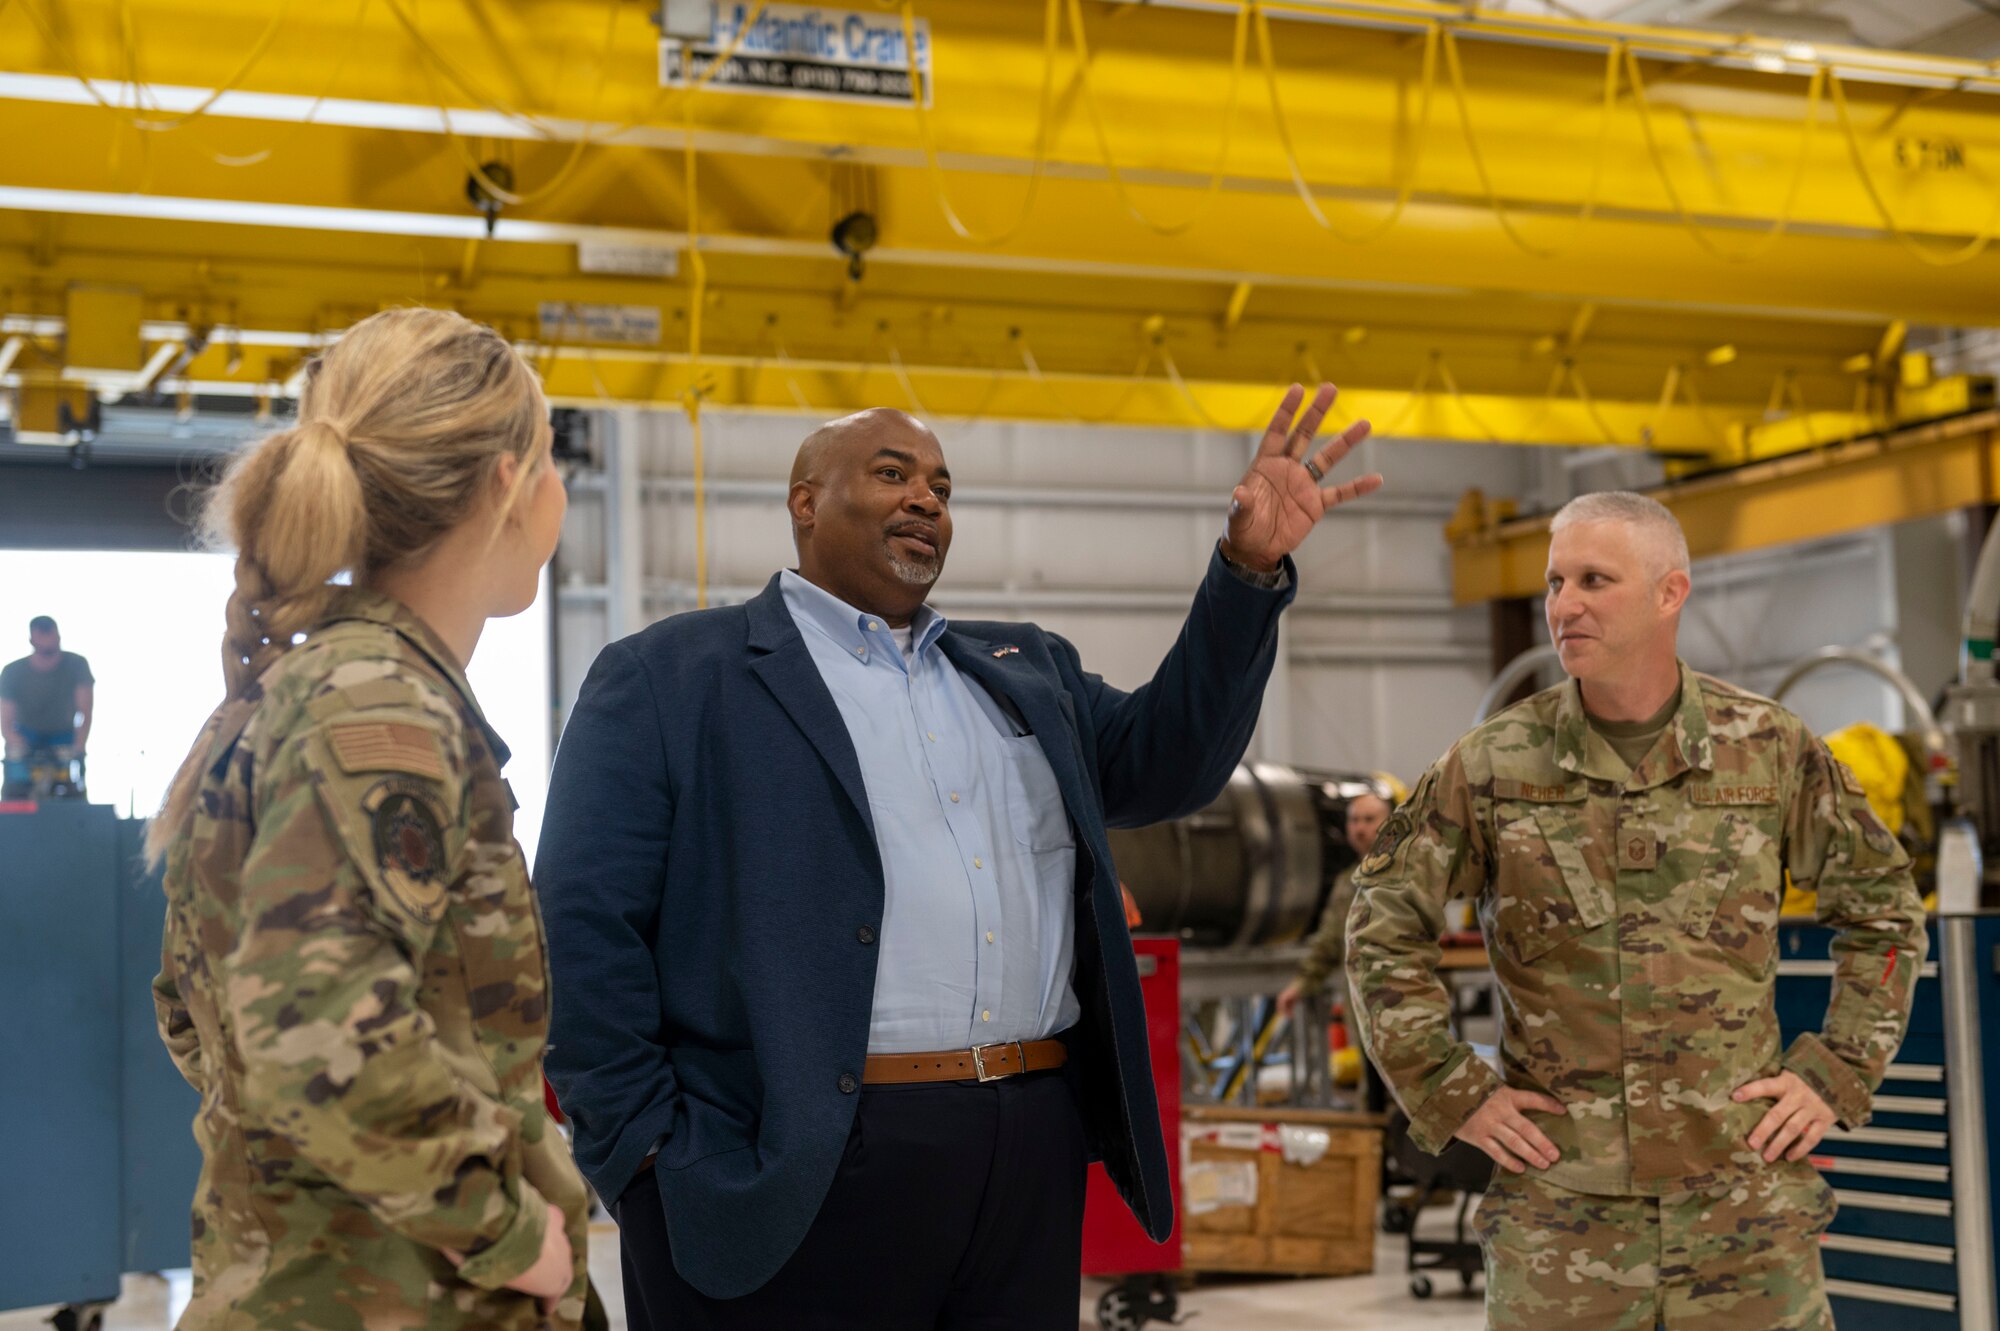 Mark Robinson, North Carolina Lt. Gov., takes a tour of the facilities on the flightline at Seymour Johnson Air Force Base, North Carolina, March 23, 2022. Robinson was elected as the 35th Lt. Governor of North Carolina in 2021. (U.S. Air Force photo by Senior Airman Kevin Holloway)